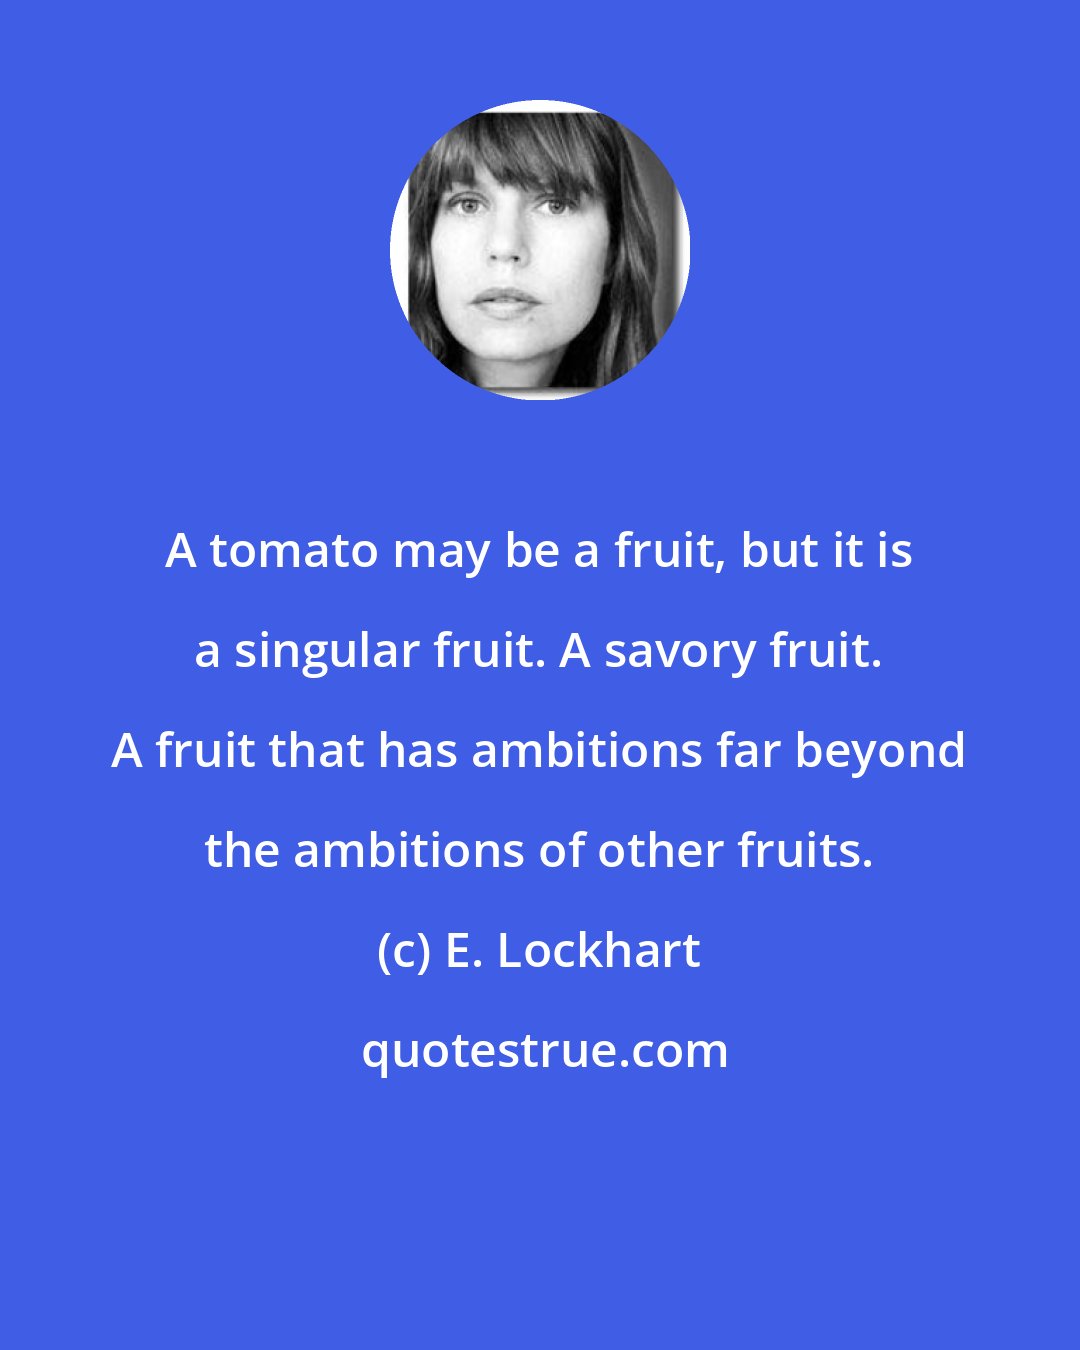 E. Lockhart: A tomato may be a fruit, but it is a singular fruit. A savory fruit. A fruit that has ambitions far beyond the ambitions of other fruits.